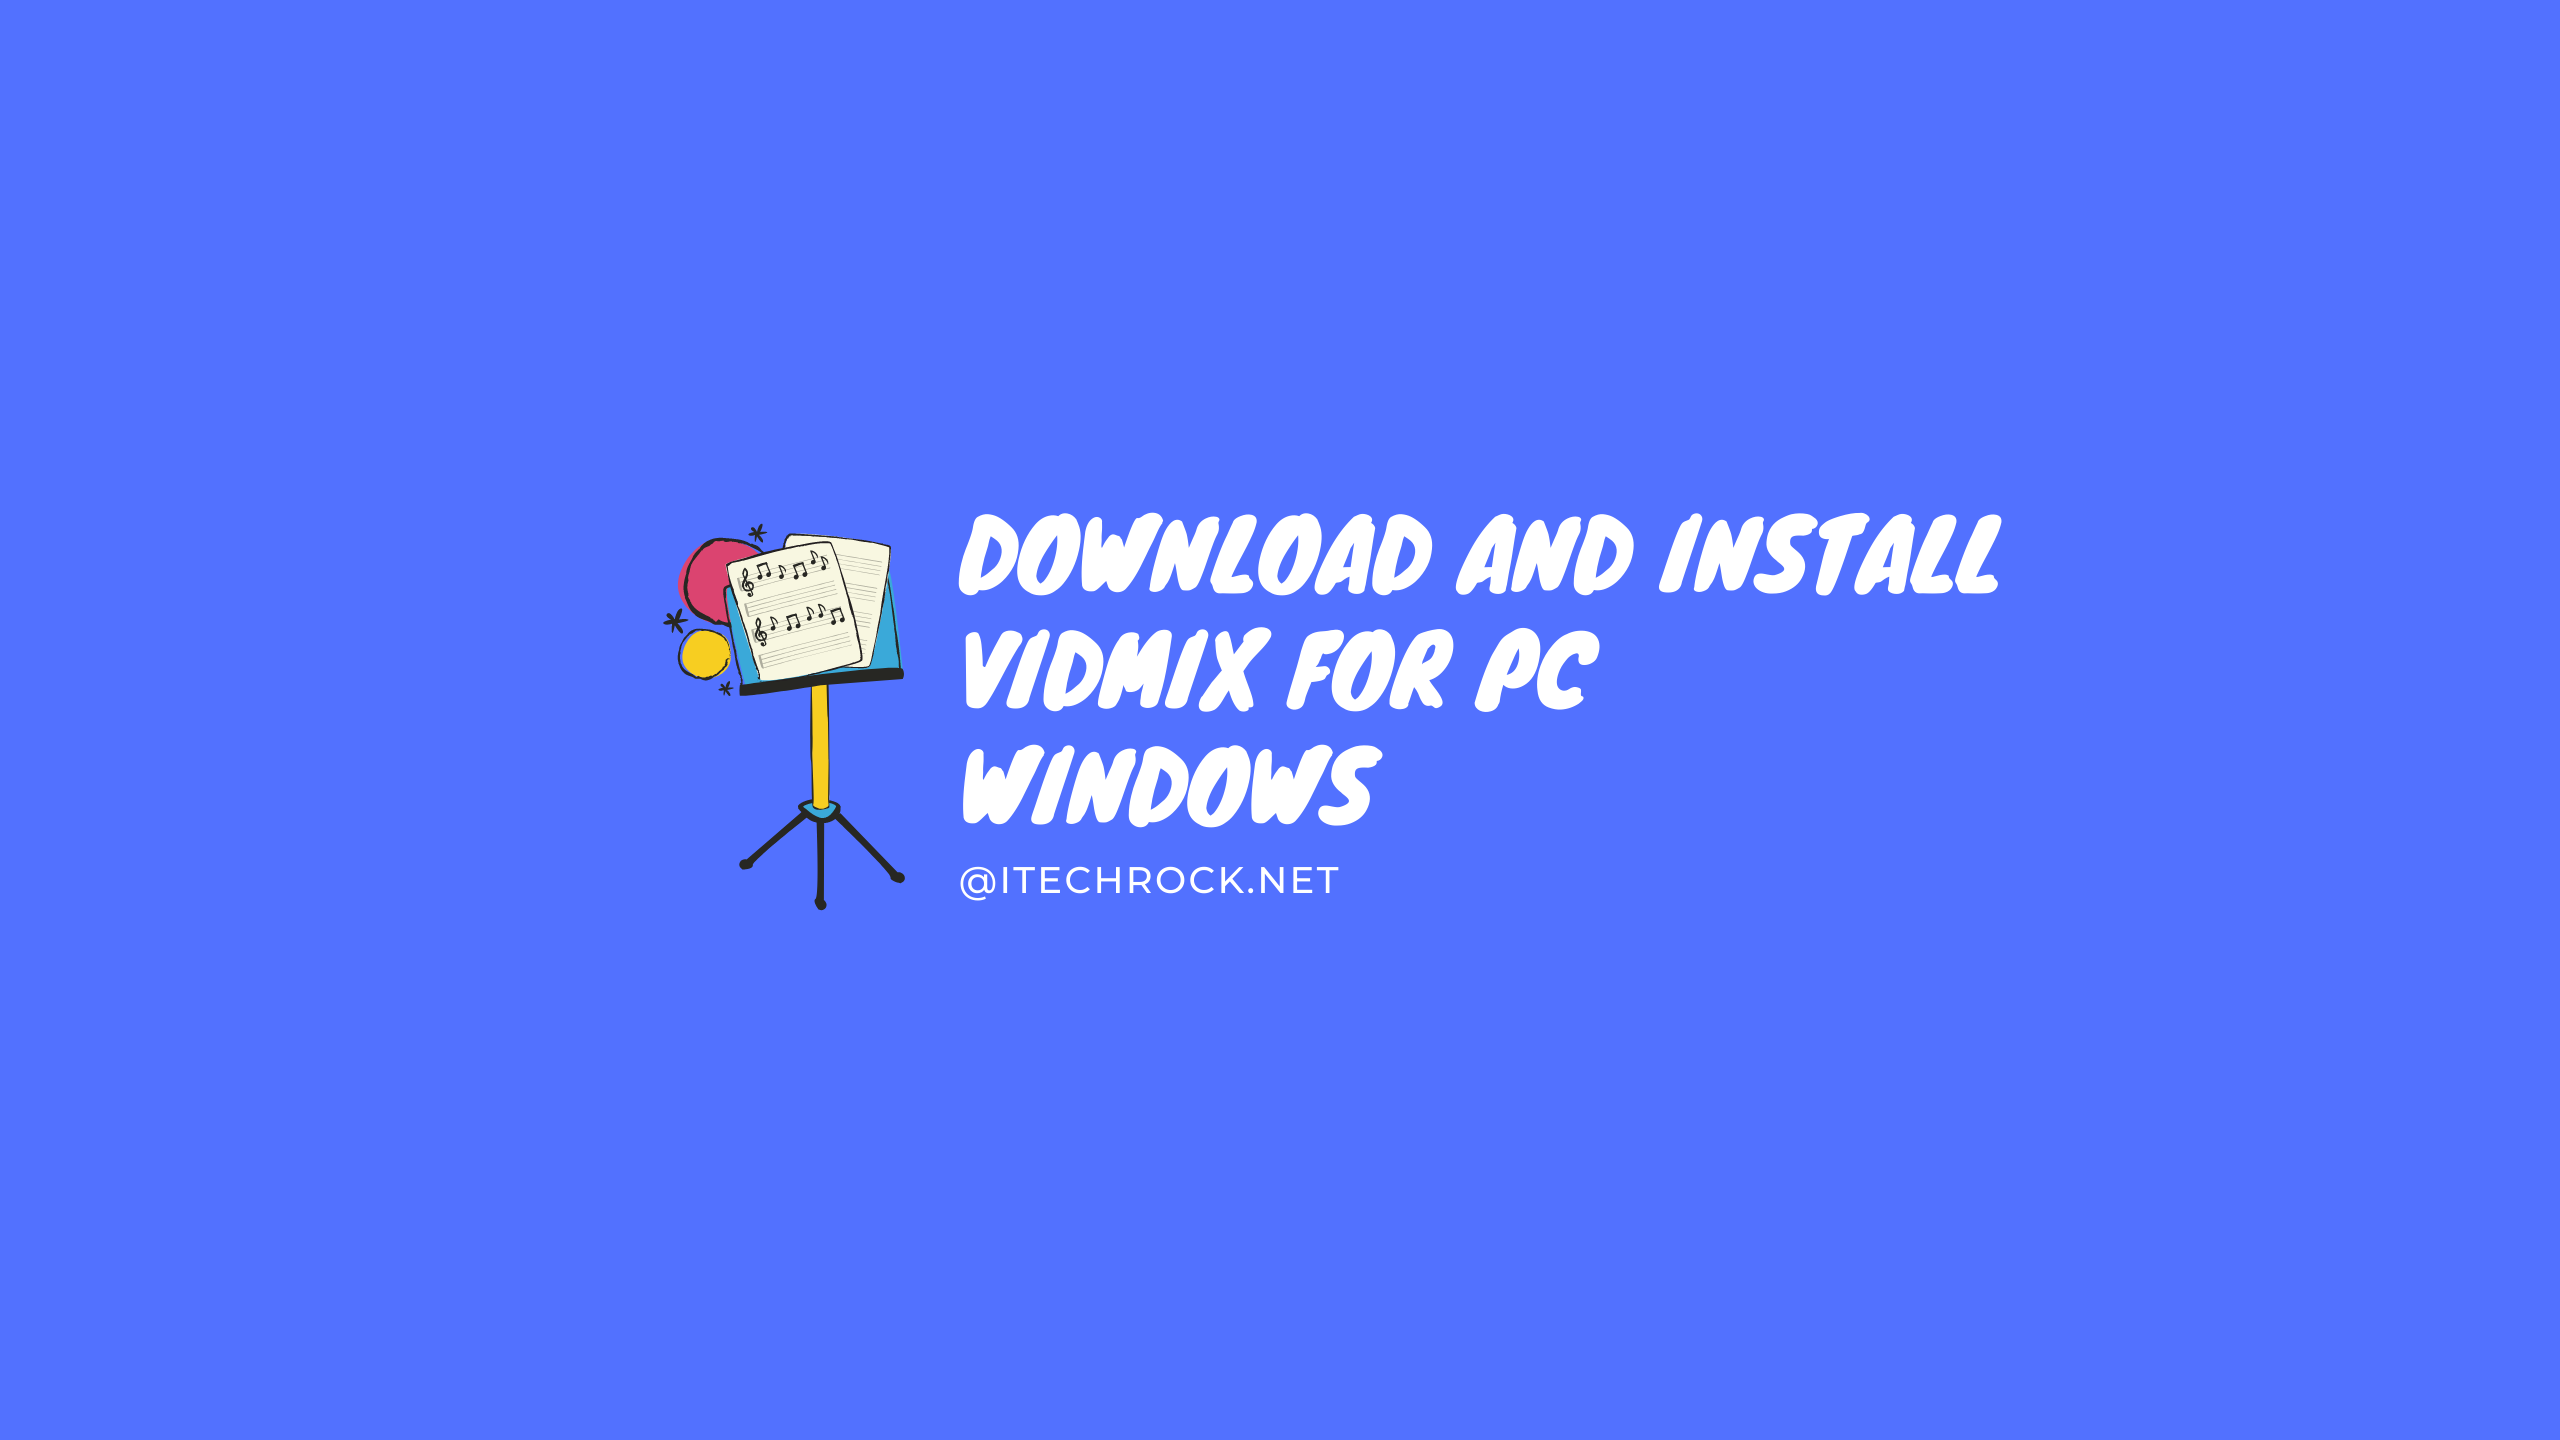 Download and Install Vidmix for PC